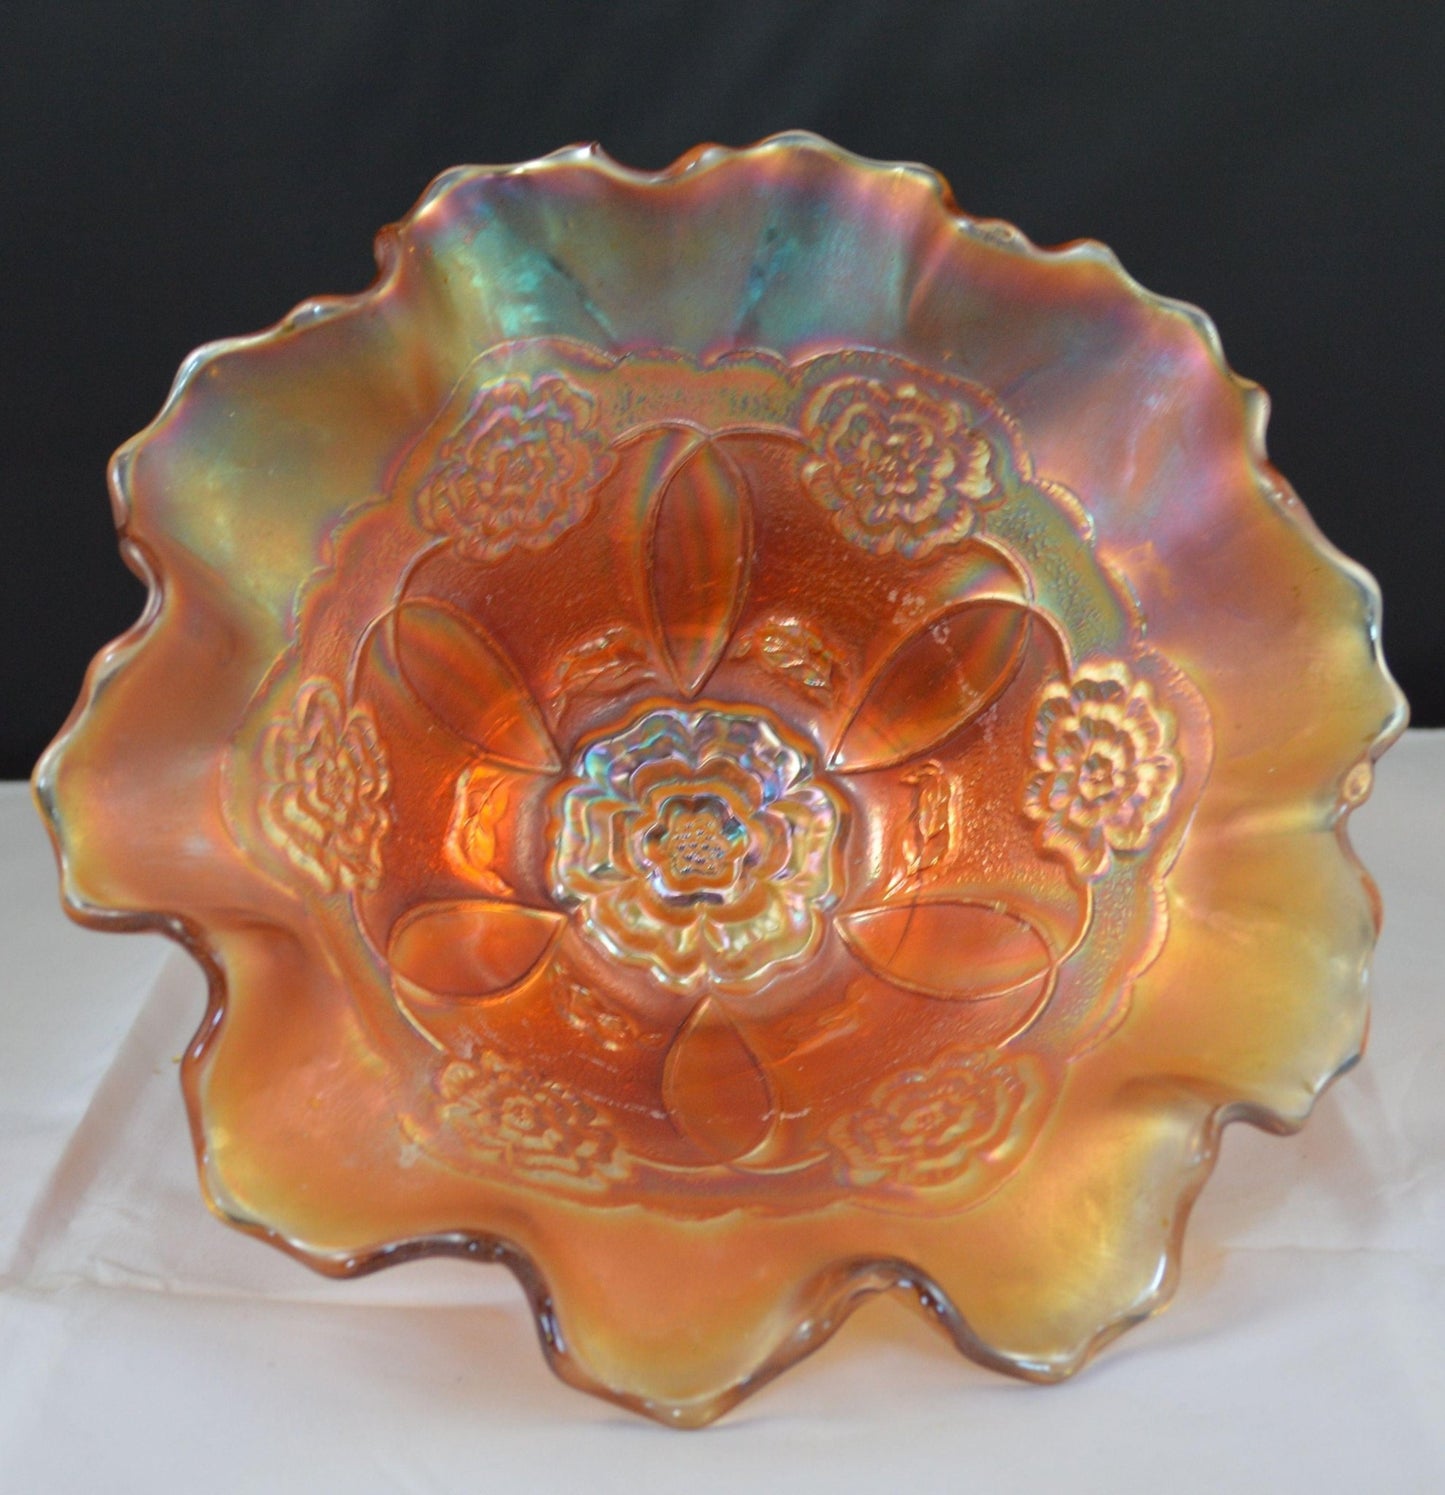 VINTAGE CARNIVAL GLASS BOWL WITH FLORAL PATTERN(PREVIOUSLY OWNED)FAIRLY GOOD CONDITION - TMD167207